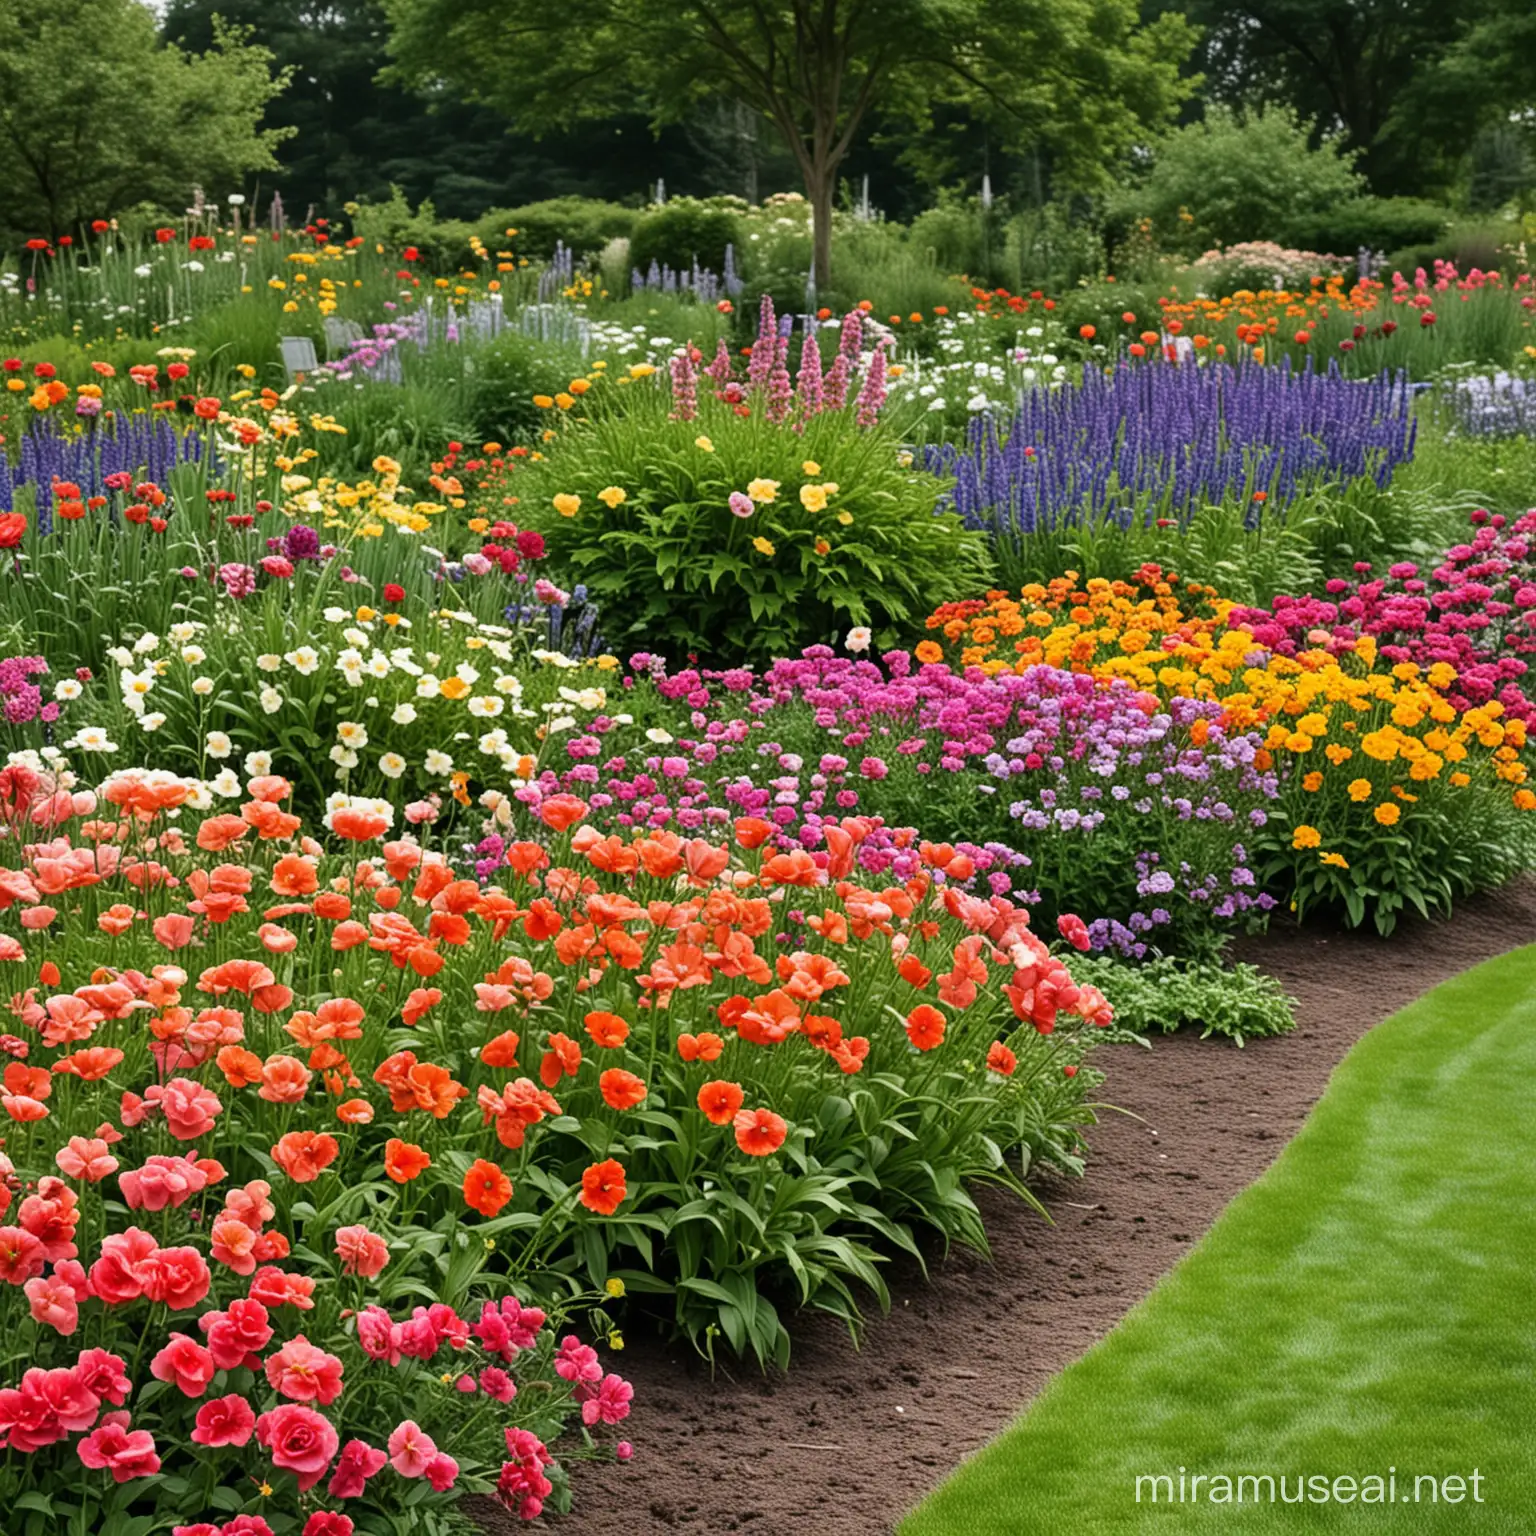 Vibrant Flower Garden Blooming with Colorful Blossoms